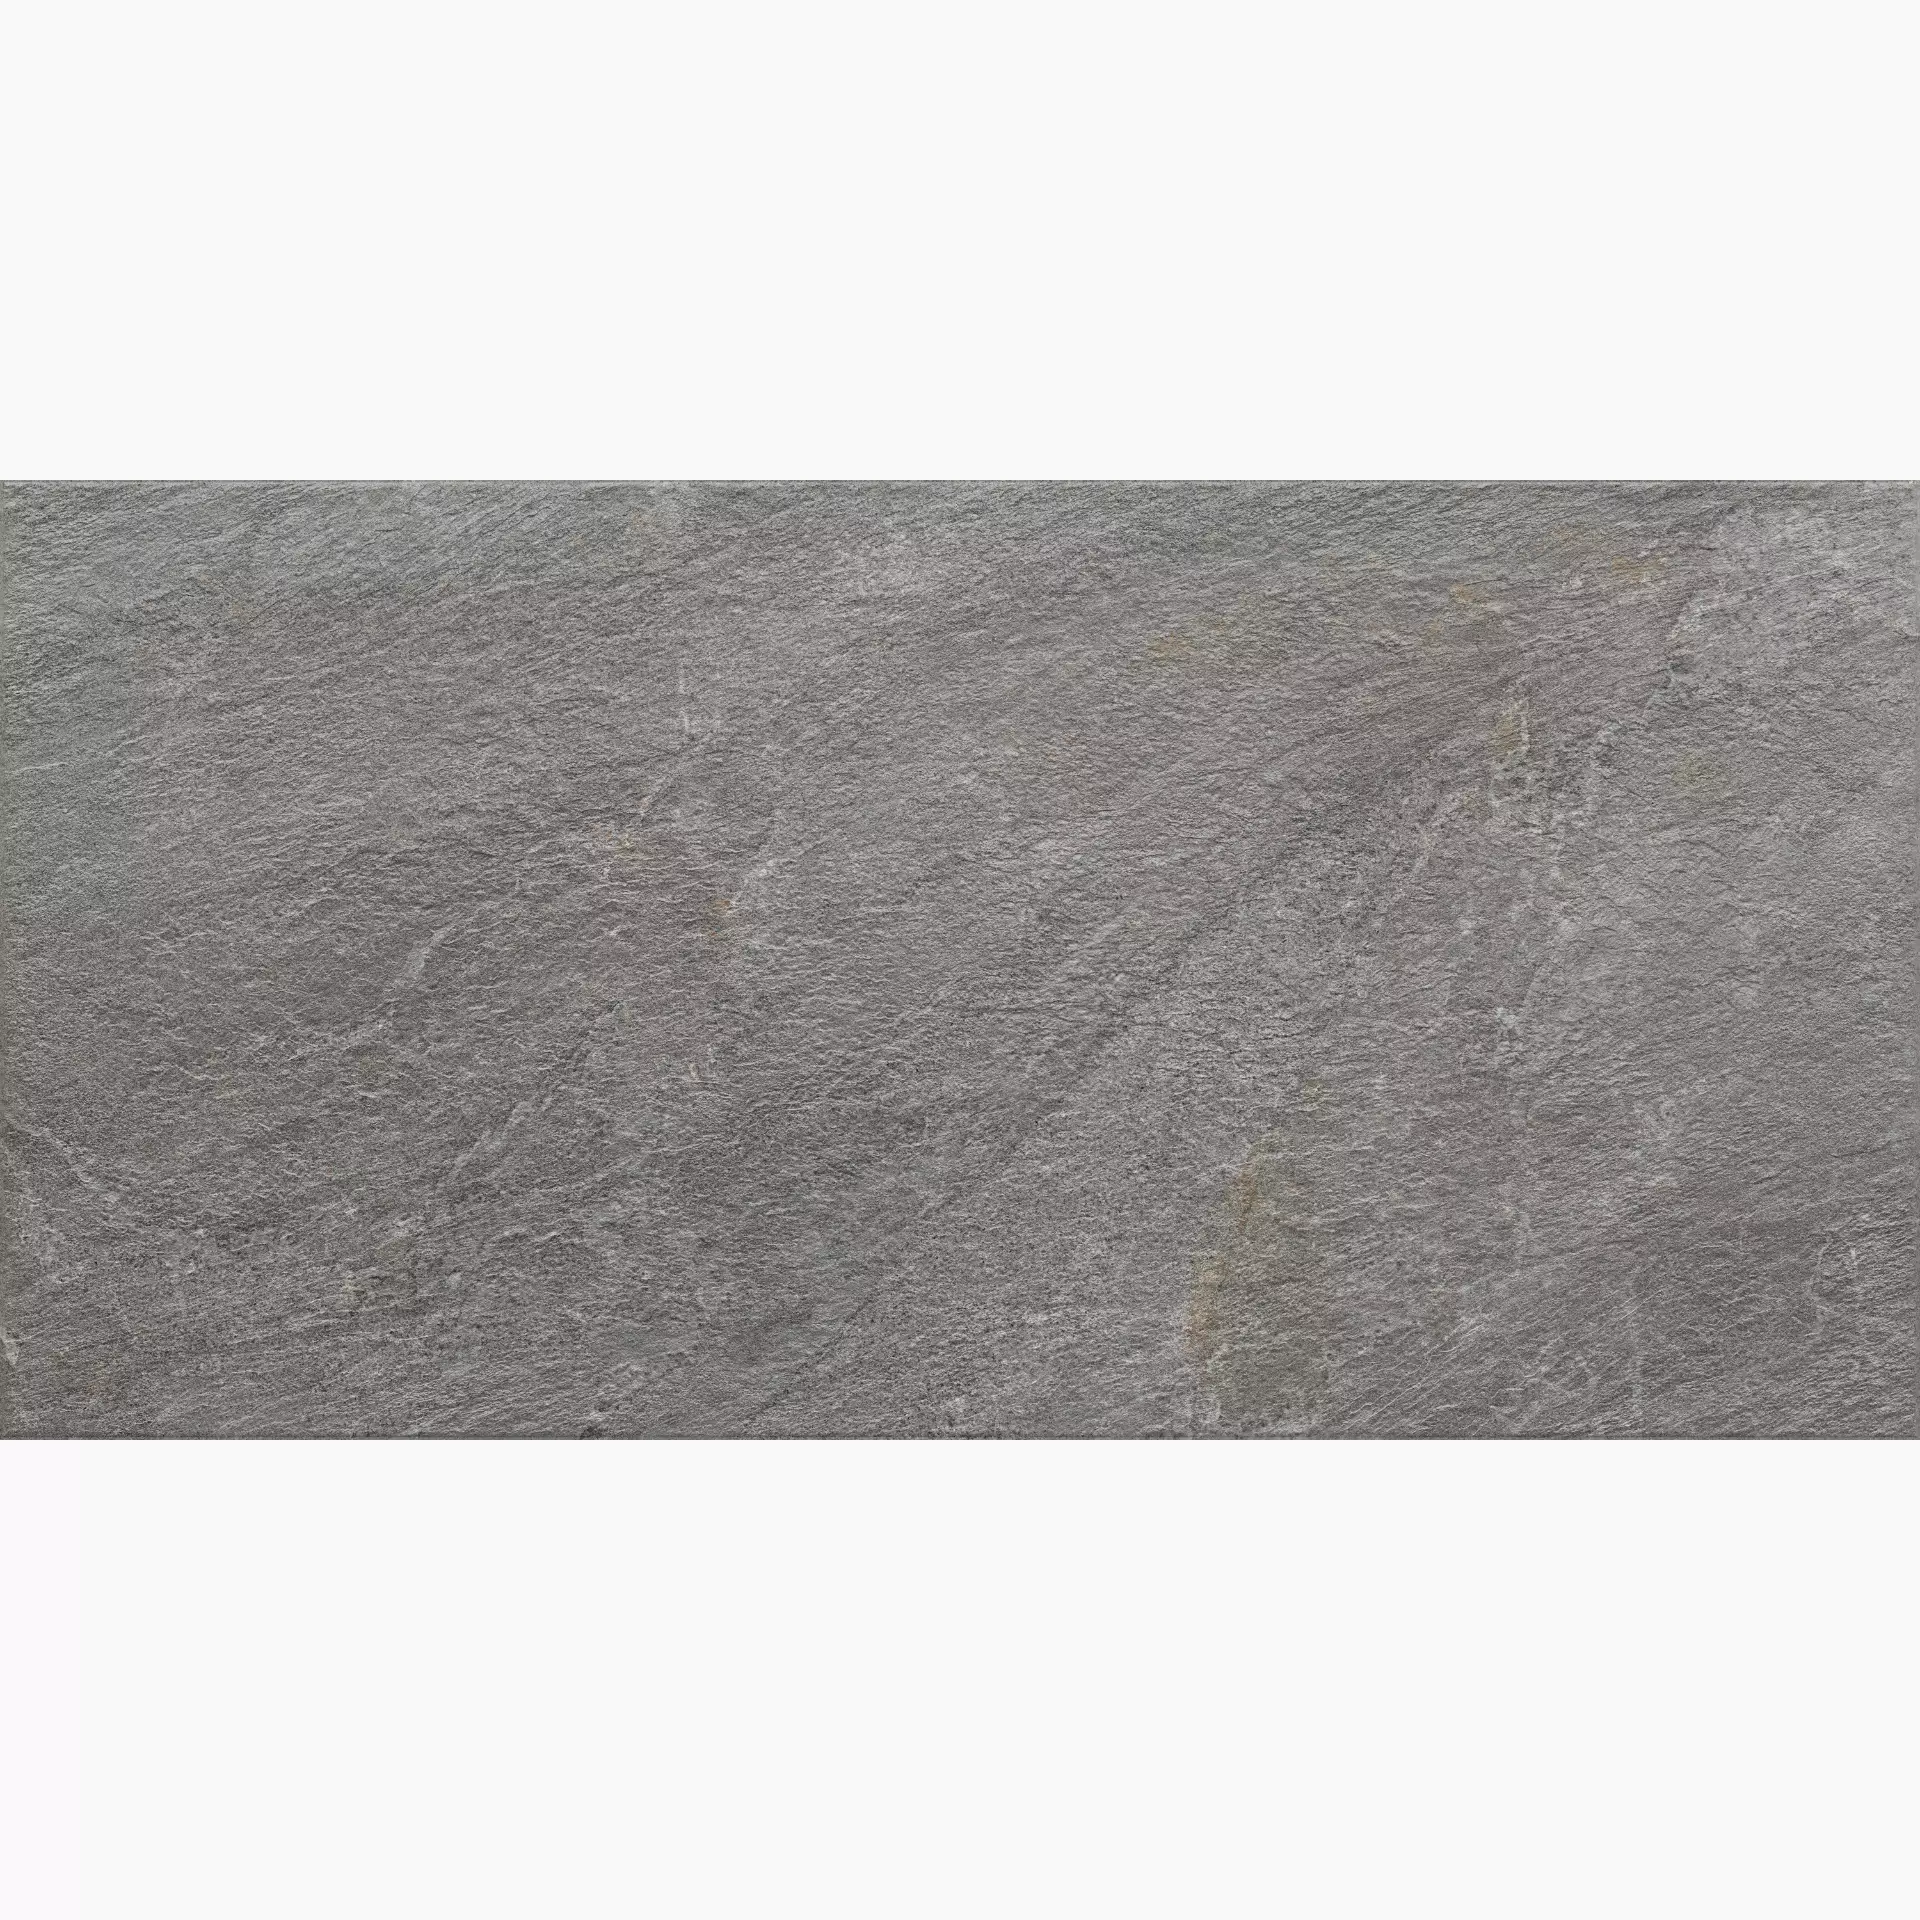 Panaria The Place Suburb Grey Antibacterial - Strutturato PGXP970 60x120cm rectified 20mm